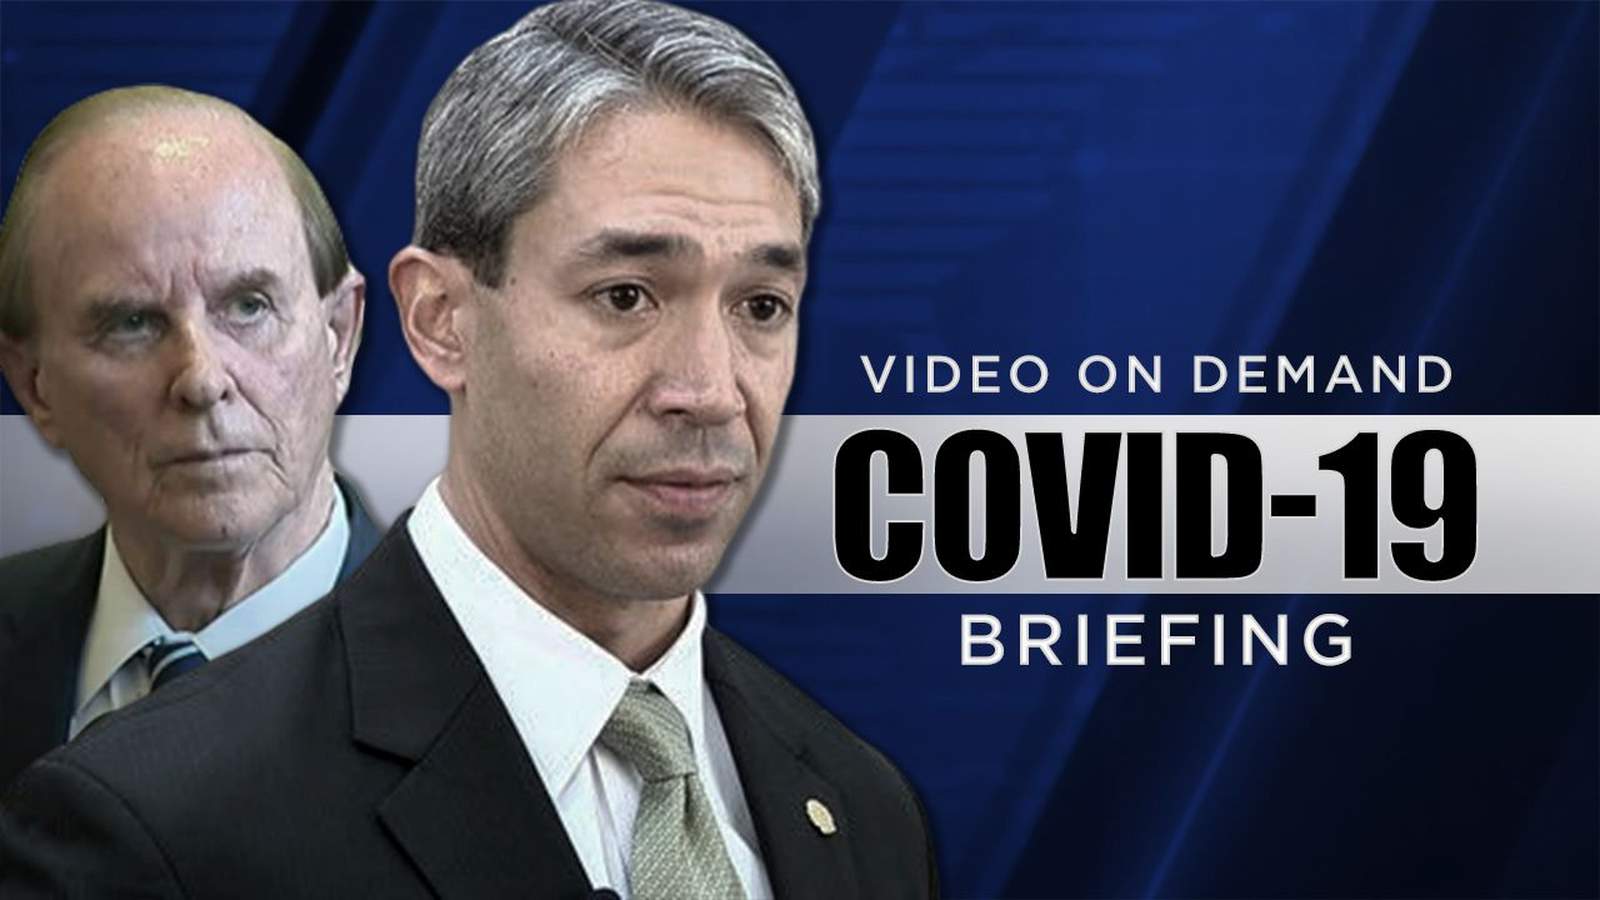 Coronavirus update San Antonio, June 19: Mayor Nirenberg says best gift for Fathers Day is to stay away amid COVID-19 case uptick